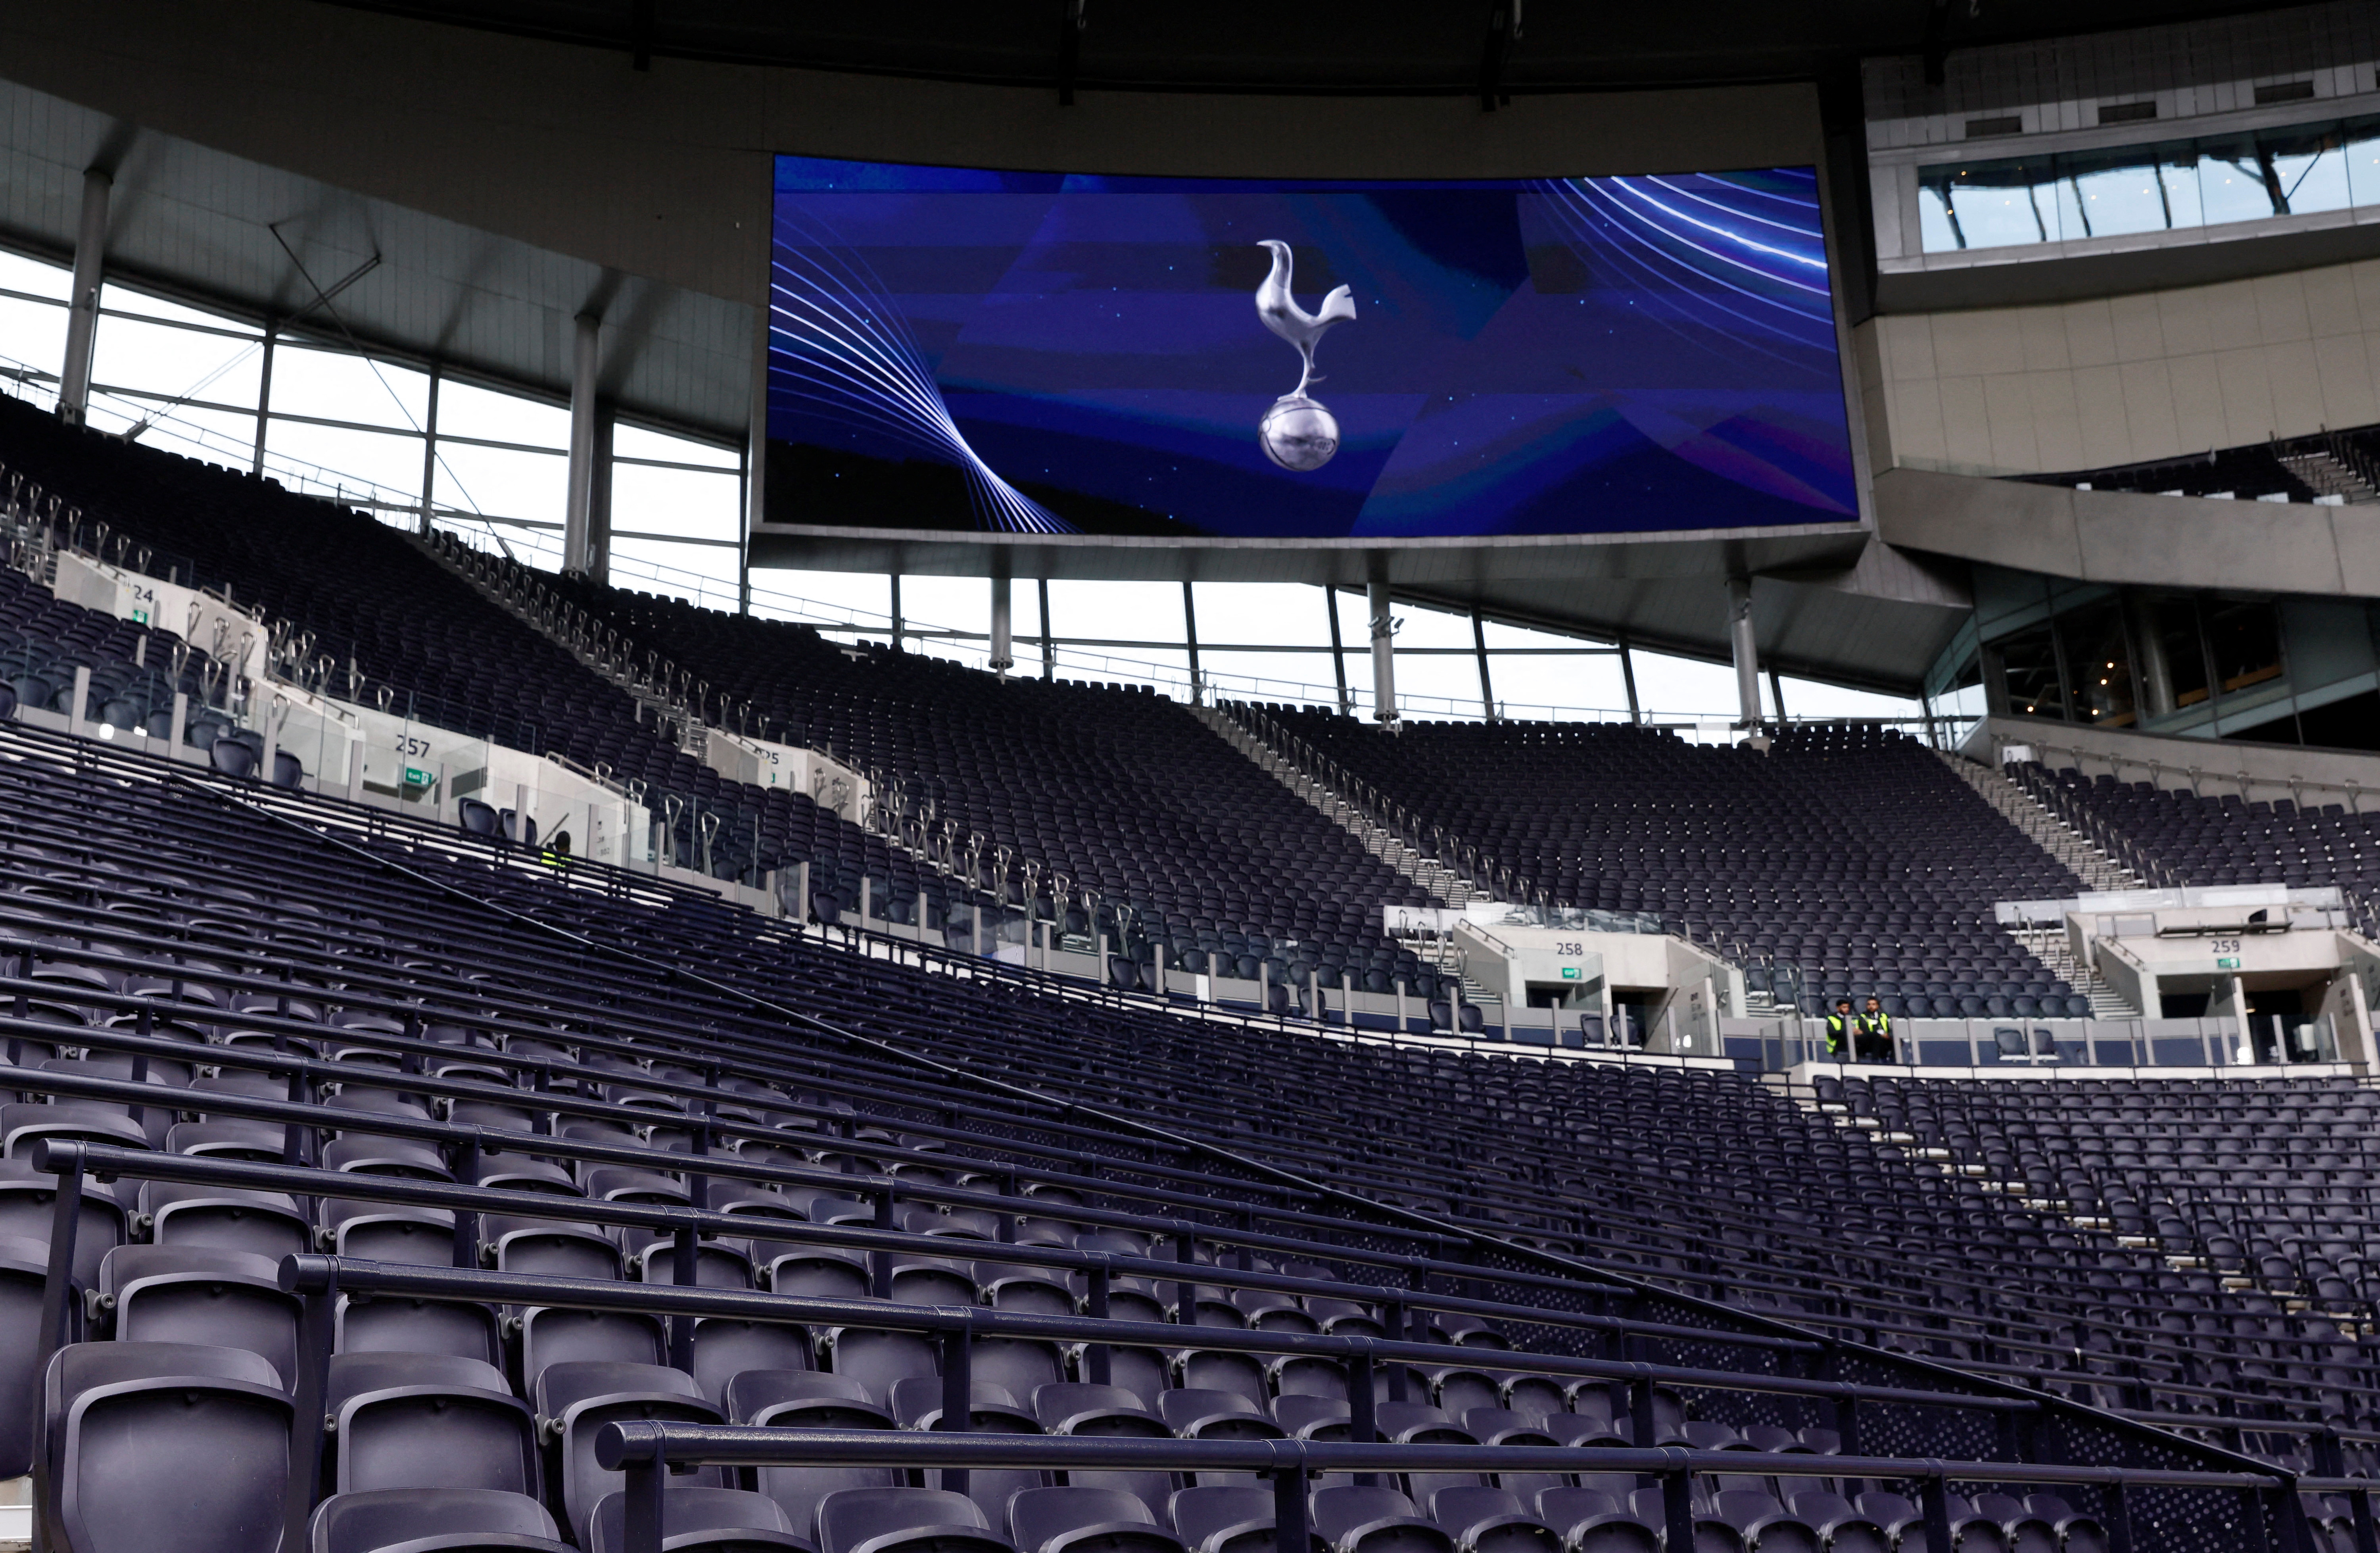 FILE PHOTO: Soccer Football - Premier League - Tottenham Hotspur v Burnley - Tottenham Hotspur Stadium, London, Britain - May 15, 2022 General view of a safe standing seated area inside the stadium before the match Action Images via Reuters/Andrew Couldridge EDITORIAL USE ONLY. No use with unauthorized audio, video, data, fixture lists, club/league logos or 'live' services. Online in-match use limited to 75 images, no video emulation. No use in betting, games or single club/league/player publications.  Please contact your account representative for further details./File Photo